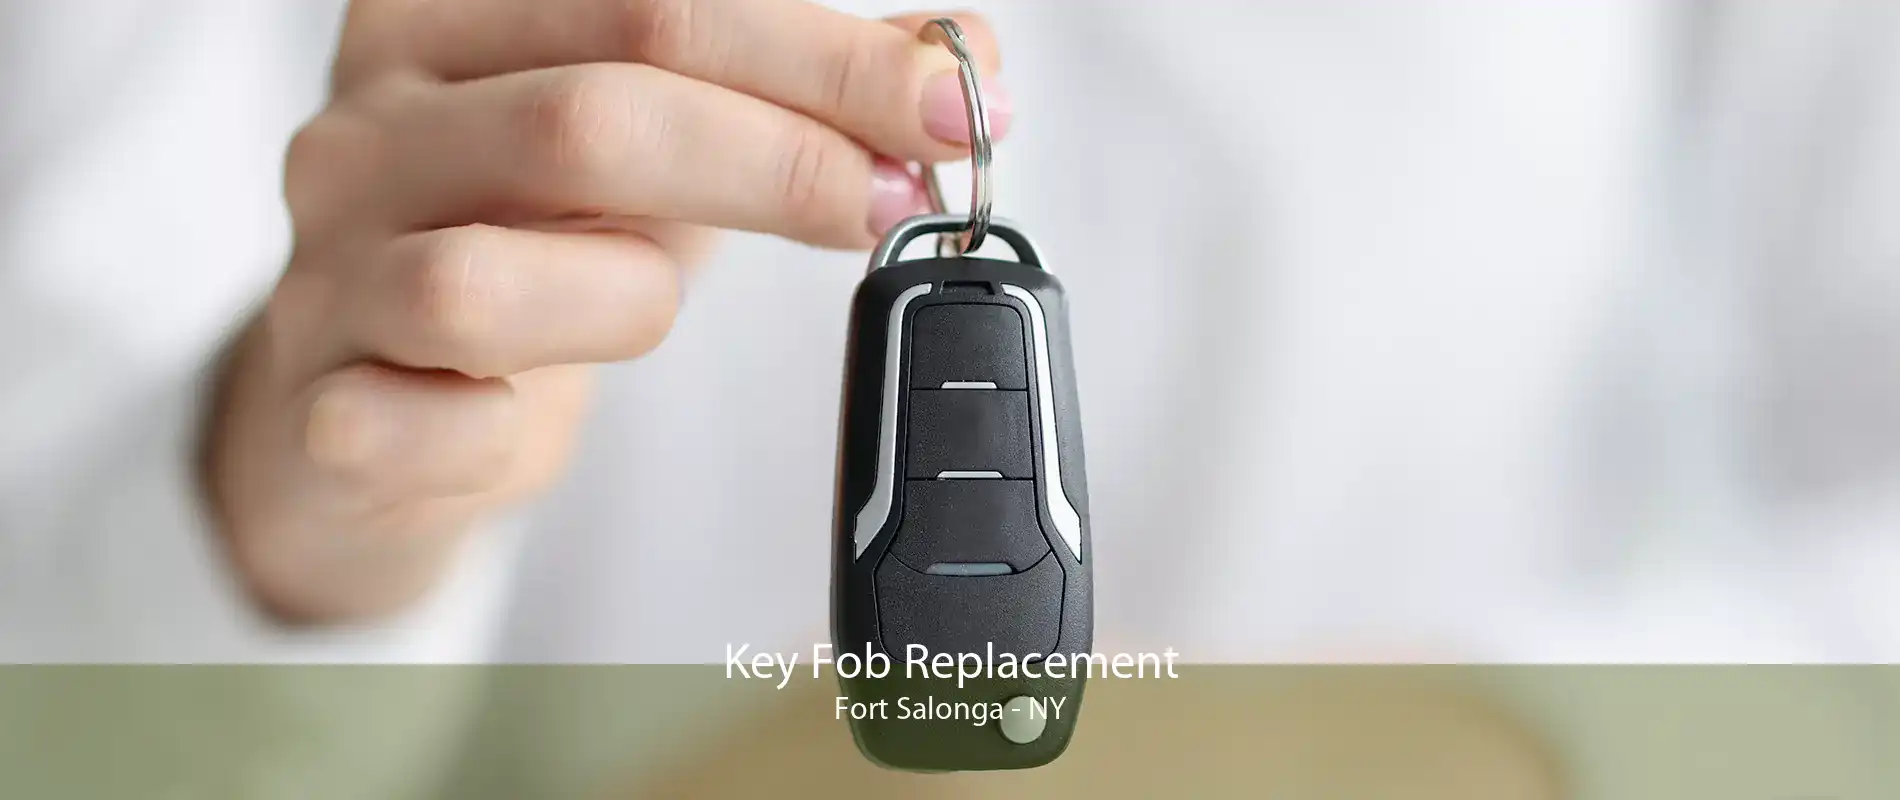 Key Fob Replacement Fort Salonga - NY